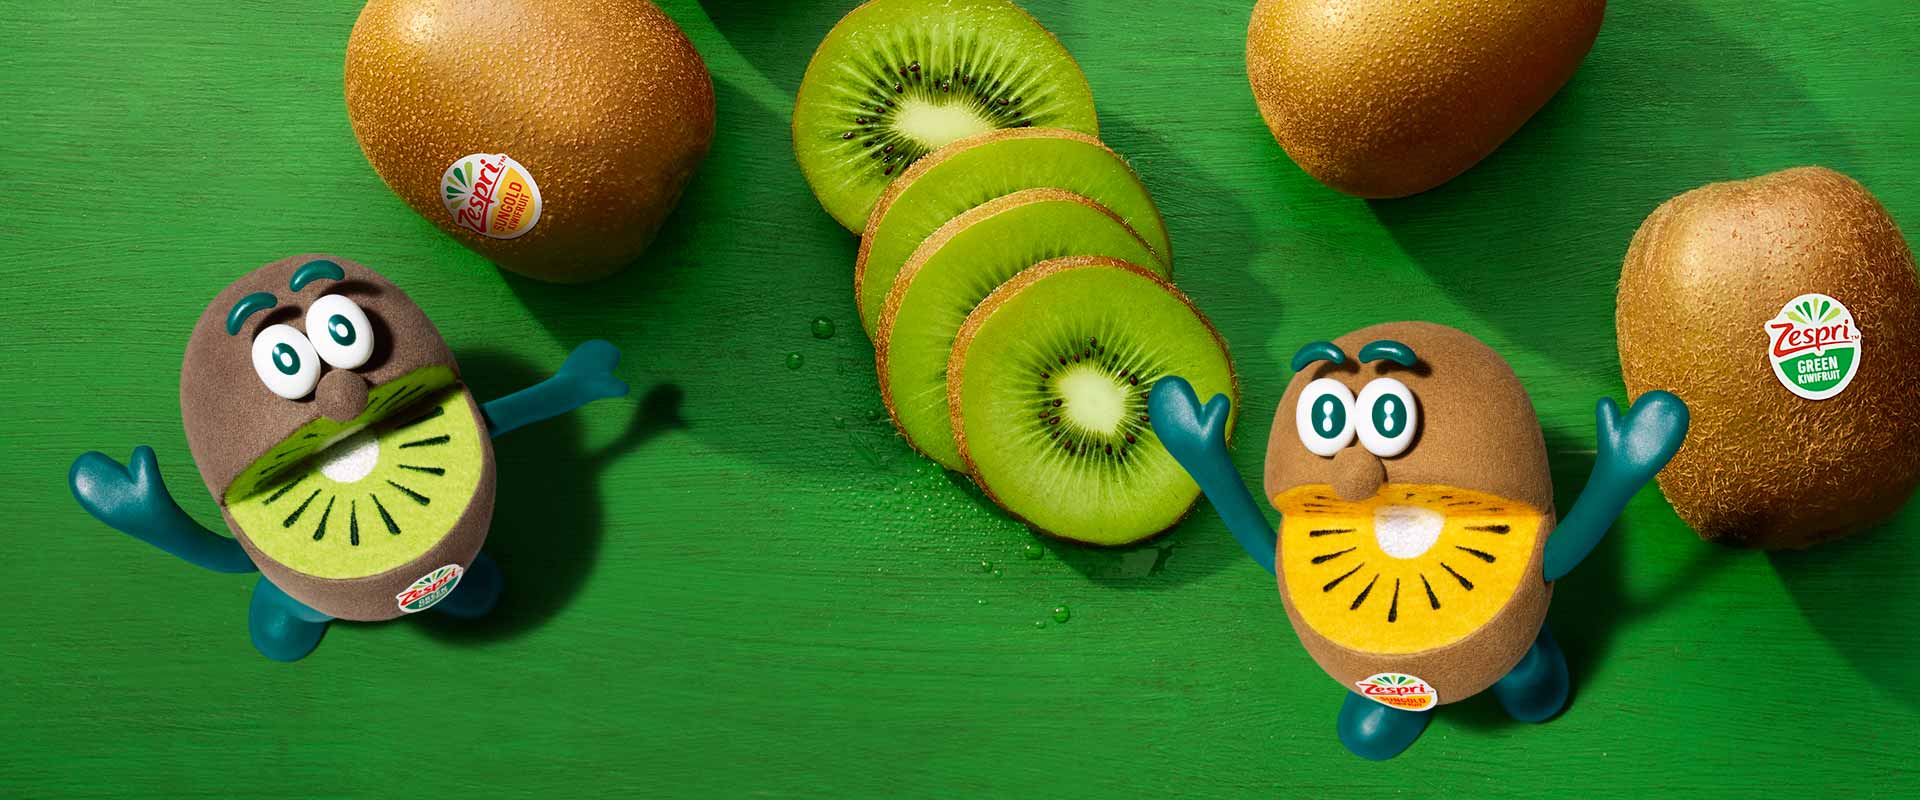 How Many Calories and Carbs Does a Kiwifruit Contain? - Header